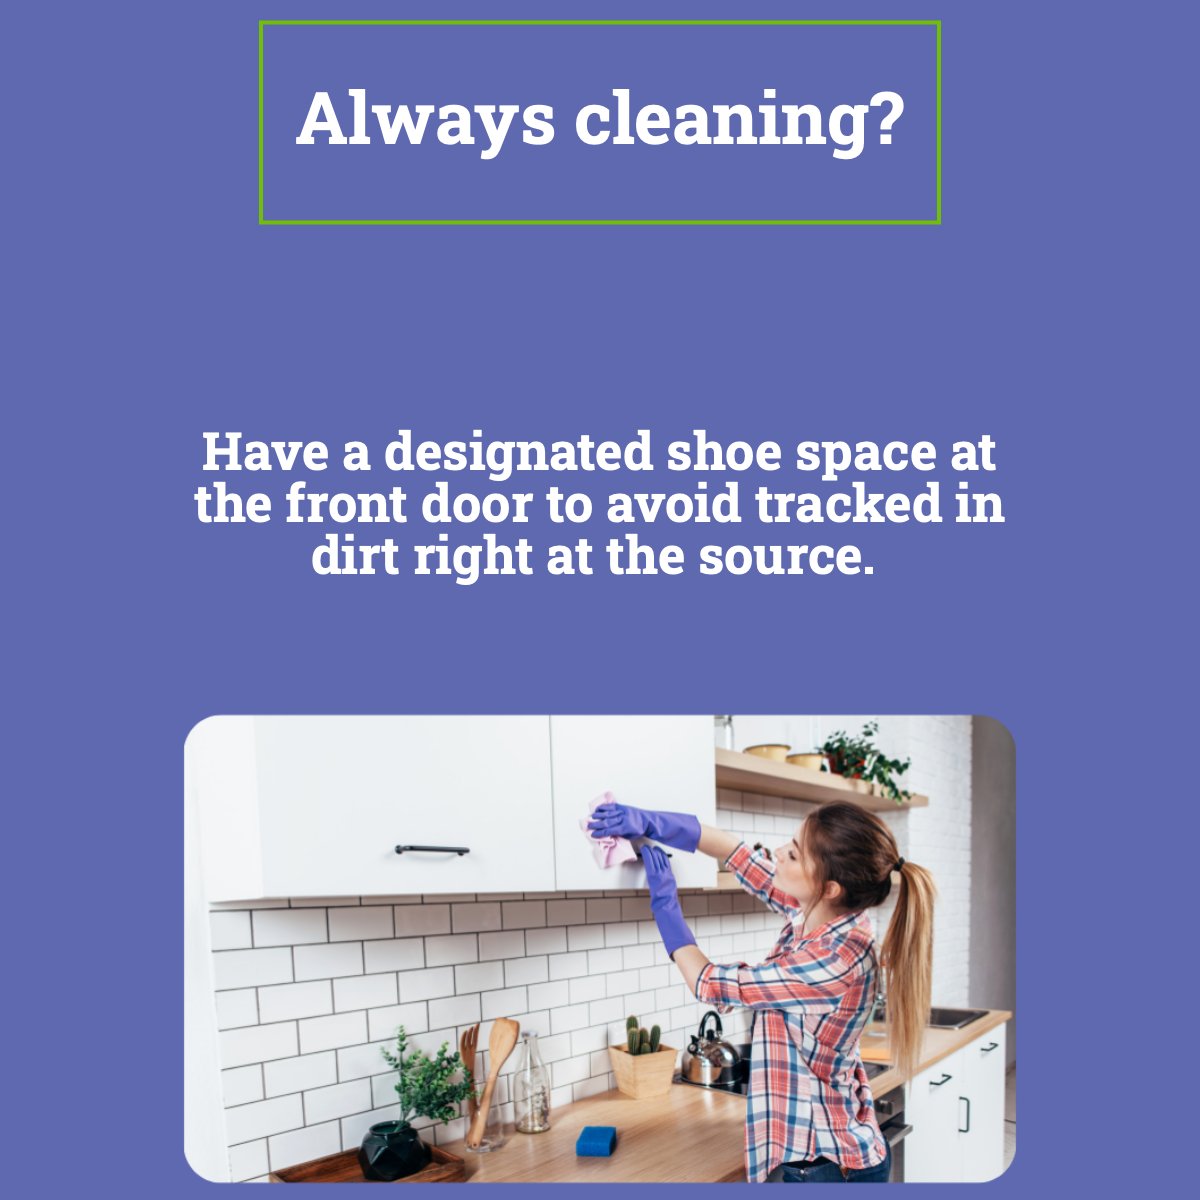 If you are tired of cleaning all the time, try this tip! 💡

#cleaningtips #cleanhouse #cleaninghacks #cleanhome
 #callniecie